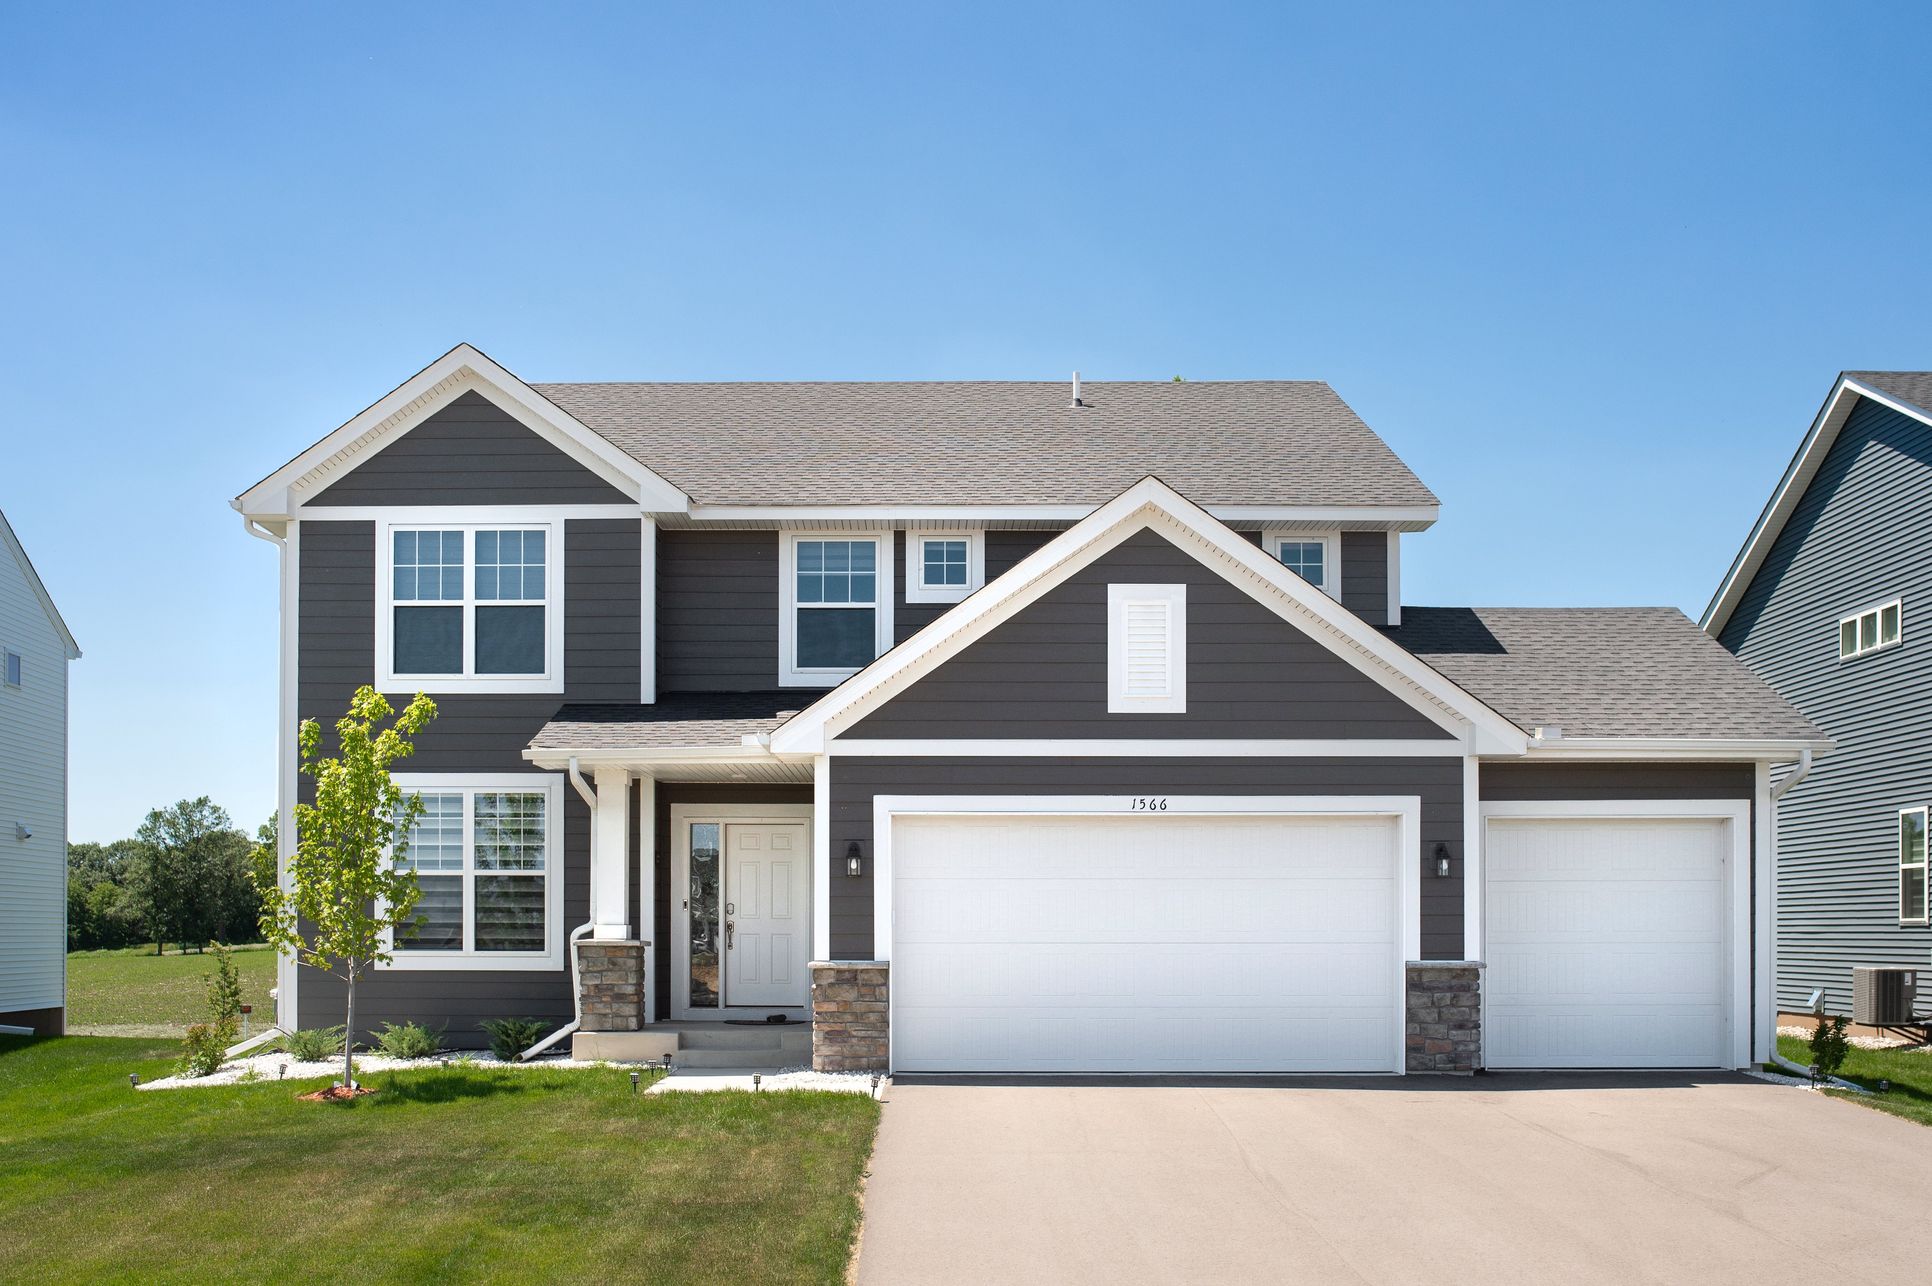 IMAGE: Single-family home exterior in Carver, MN